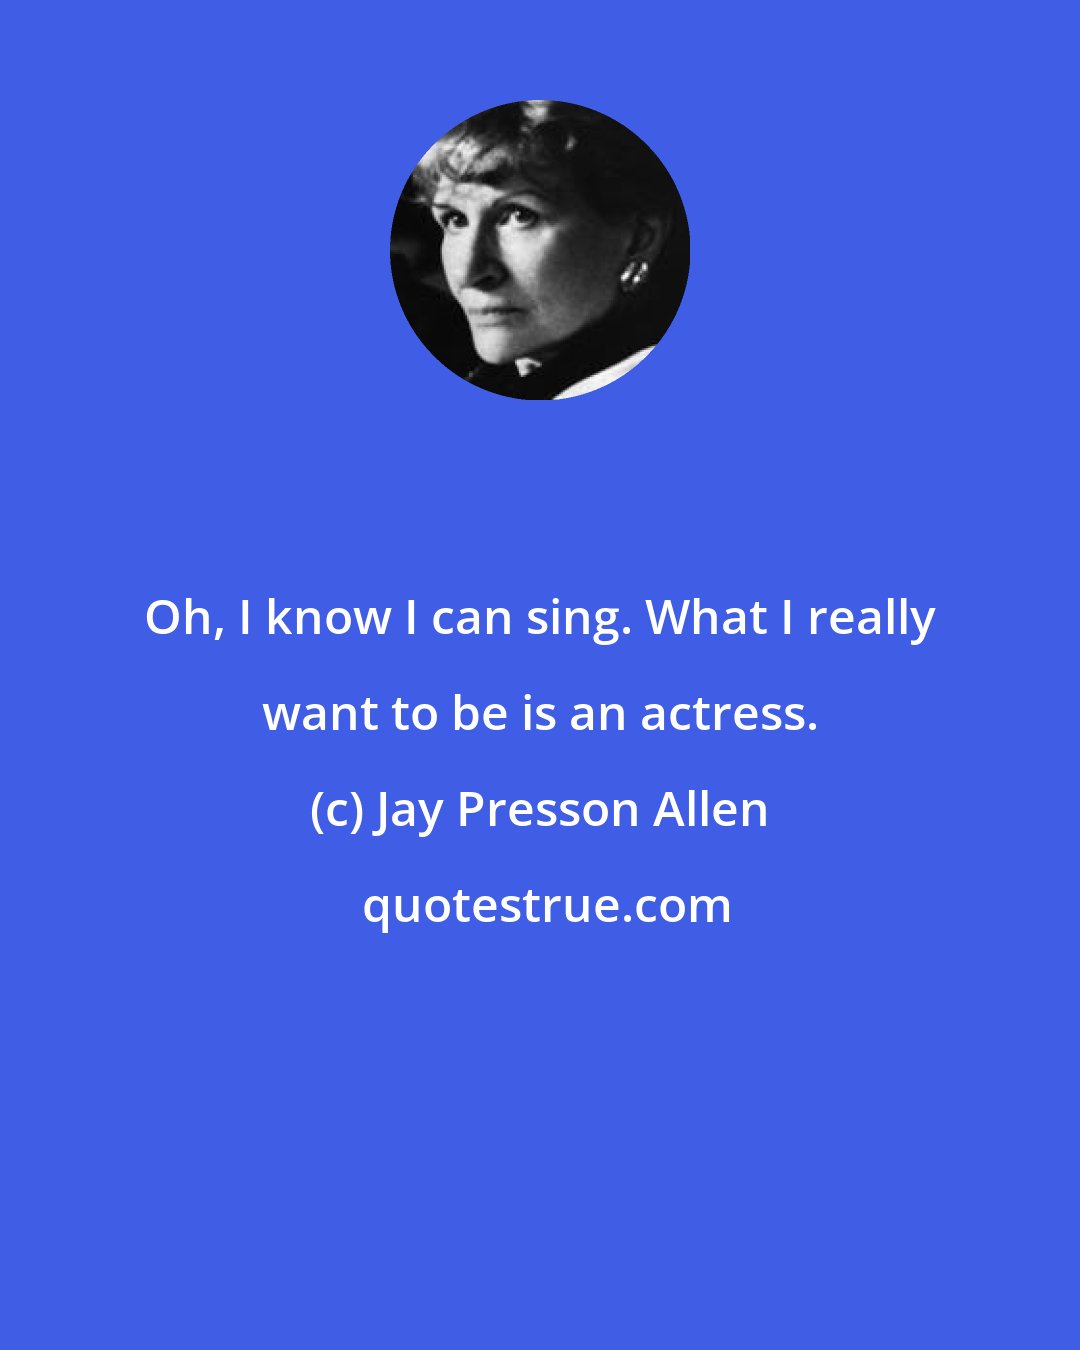 Jay Presson Allen: Oh, I know I can sing. What I really want to be is an actress.